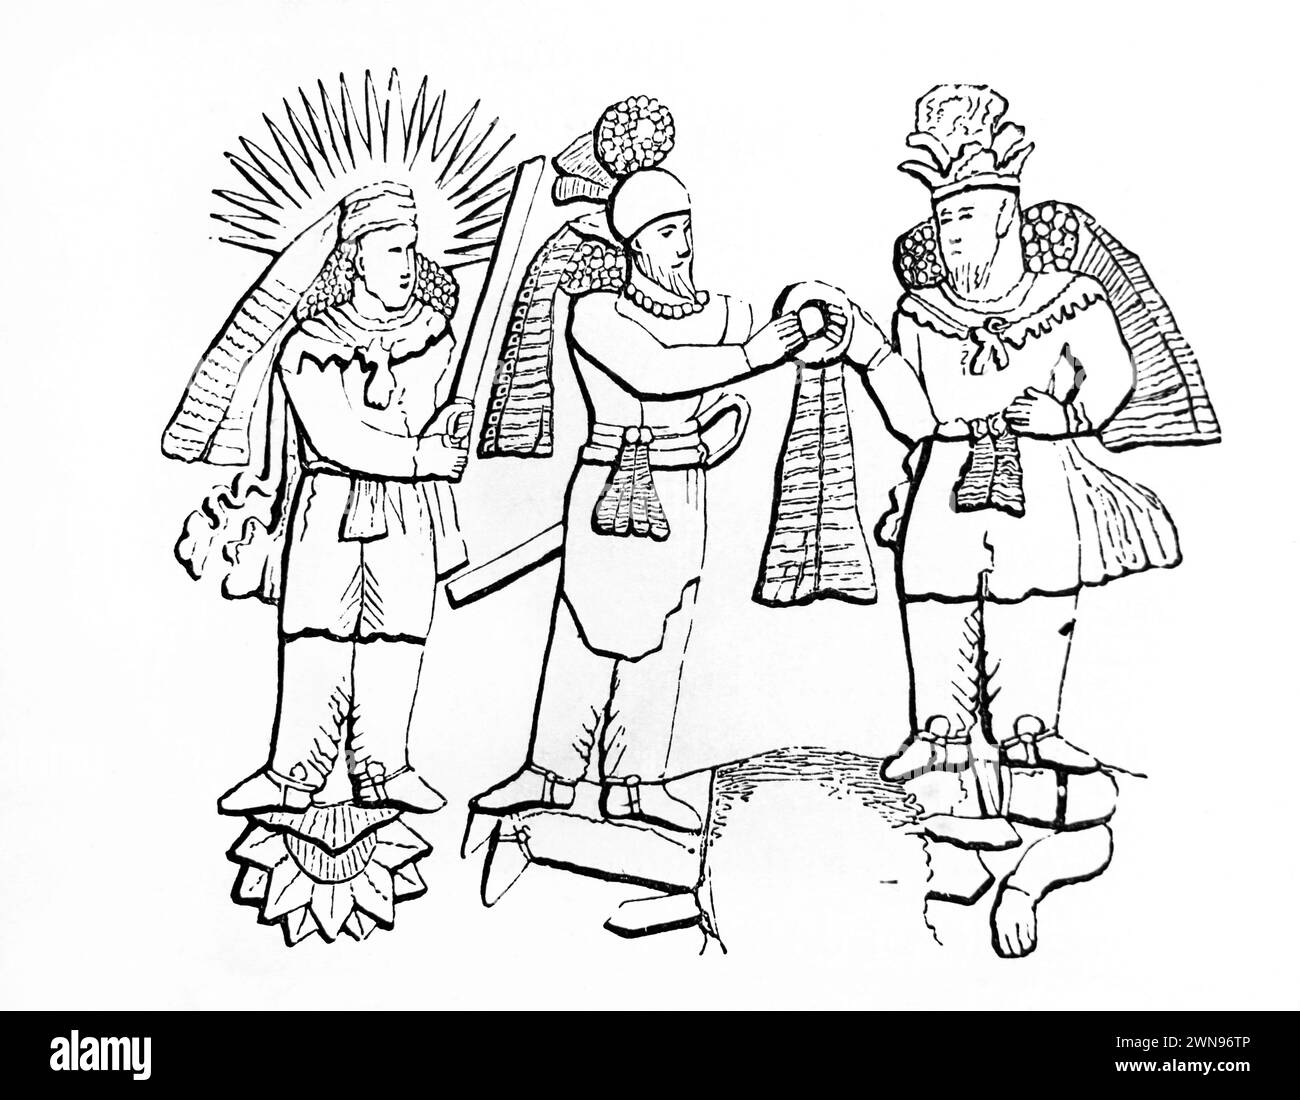 Illustration of the Coronation of King Ardashir II (Middle) receiving the Diadem from Shapur II (right) with Mithra on the Left Standing on Fallen Rom Stock Photo